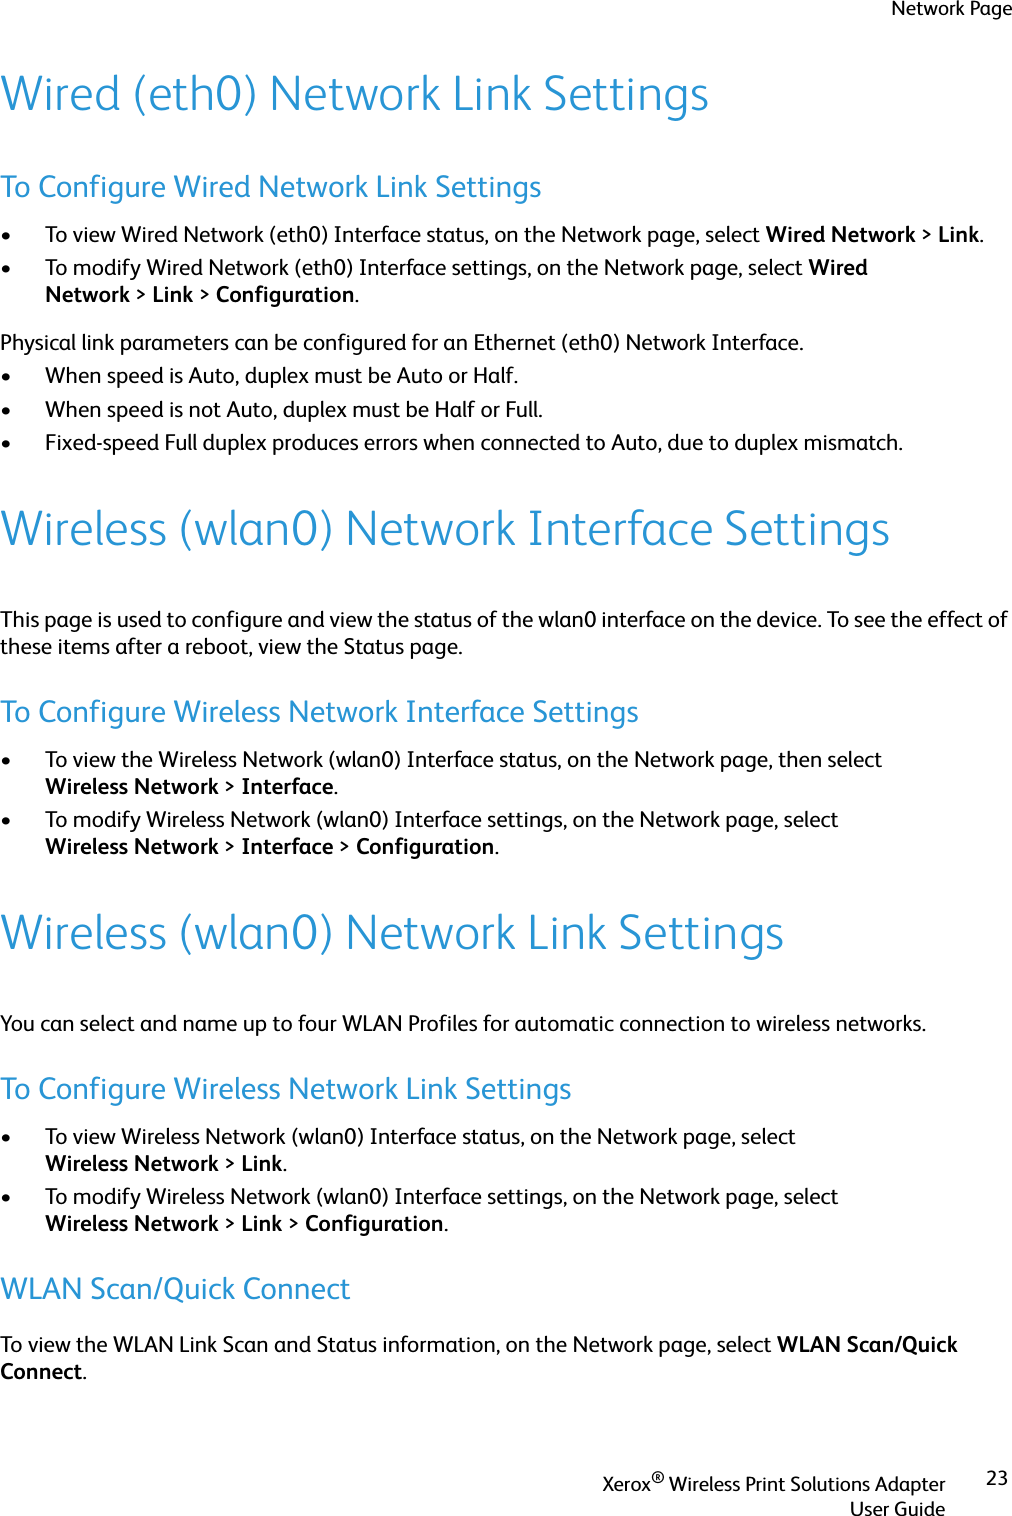 Network PageXerox® Wireless Print Solutions AdapterUser Guide23Wired (eth0) Network Link SettingsTo Configure Wired Network Link Settings• To view Wired Network (eth0) Interface status, on the Network page, select Wired Network &gt;Link.• To modify Wired Network (eth0) Interface settings, on the Network page, select Wired Network &gt;Link &gt;Configuration.Physical link parameters can be configured for an Ethernet (eth0) Network Interface.• When speed is Auto, duplex must be Auto or Half.• When speed is not Auto, duplex must be Half or Full.• Fixed-speed Full duplex produces errors when connected to Auto, due to duplex mismatch.Wireless (wlan0) Network Interface SettingsThis page is used to configure and view the status of the wlan0 interface on the device. To see the effect of these items after a reboot, view the Status page.To Configure Wireless Network Interface Settings• To view the Wireless Network (wlan0) Interface status, on the Network page, then select Wireless Network &gt;Interface.• To modify Wireless Network (wlan0) Interface settings, on the Network page, select Wireless Network &gt;Interface &gt;Configuration.Wireless (wlan0) Network Link SettingsYou can select and name up to four WLAN Profiles for automatic connection to wireless networks.To Configure Wireless Network Link Settings• To view Wireless Network (wlan0) Interface status, on the Network page, select Wireless Network &gt;Link.• To modify Wireless Network (wlan0) Interface settings, on the Network page, select Wireless Network &gt;Link &gt;Configuration.WLAN Scan/Quick ConnectTo view the WLAN Link Scan and Status information, on the Network page, select WLAN Scan/Quick Connect.